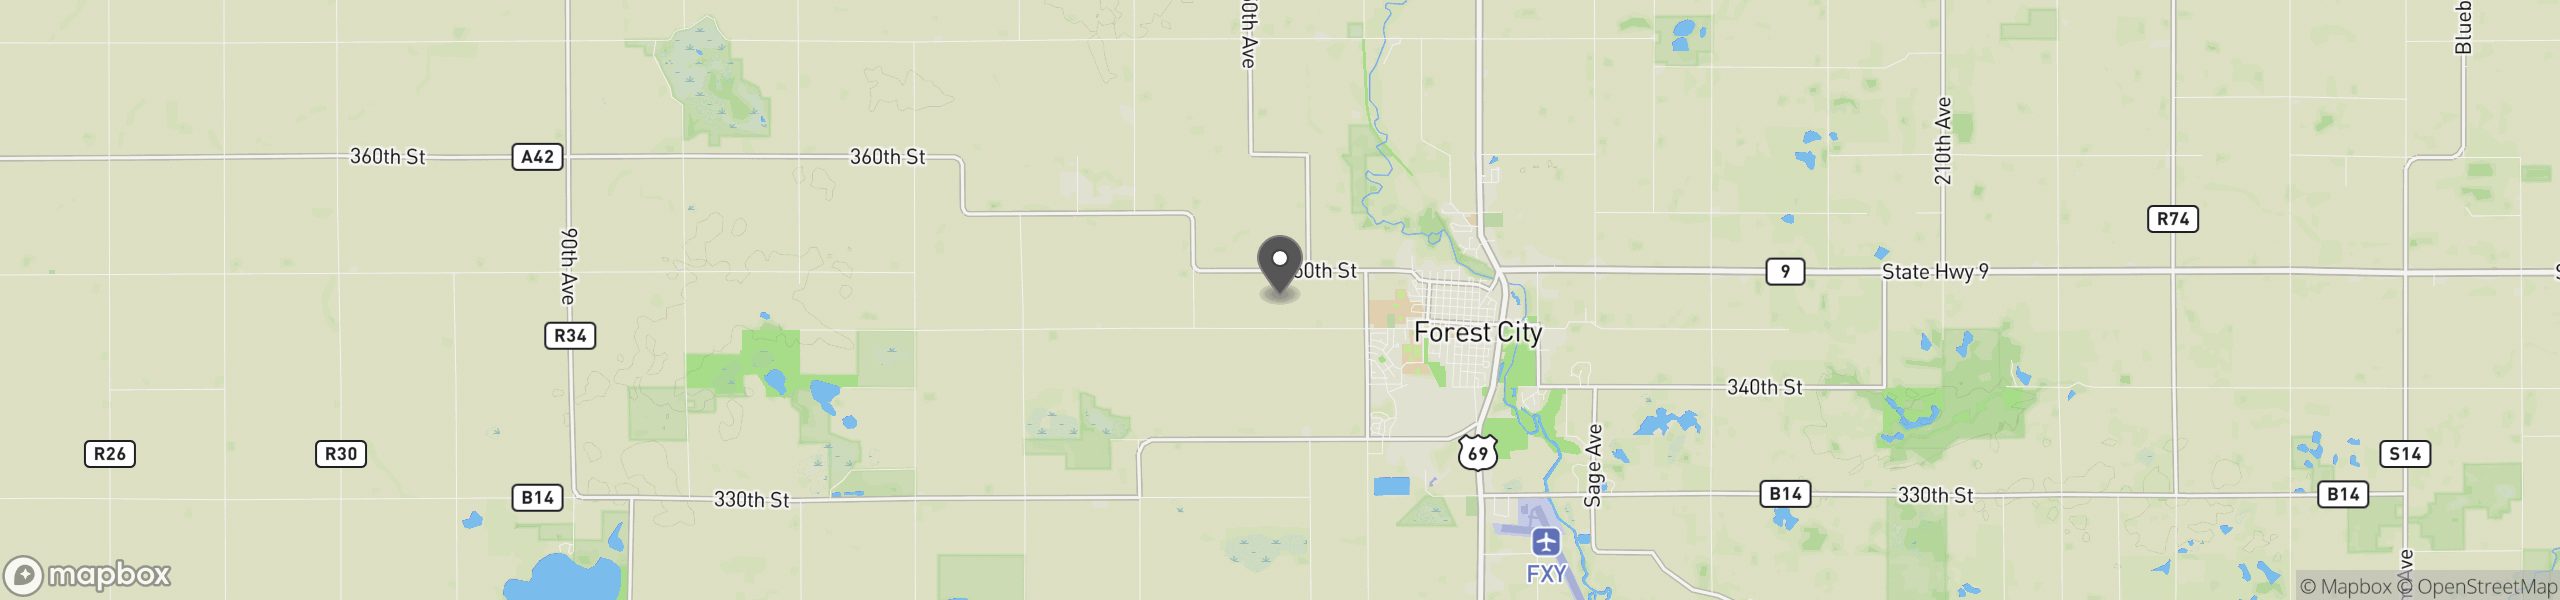 Forest City, IA 50436